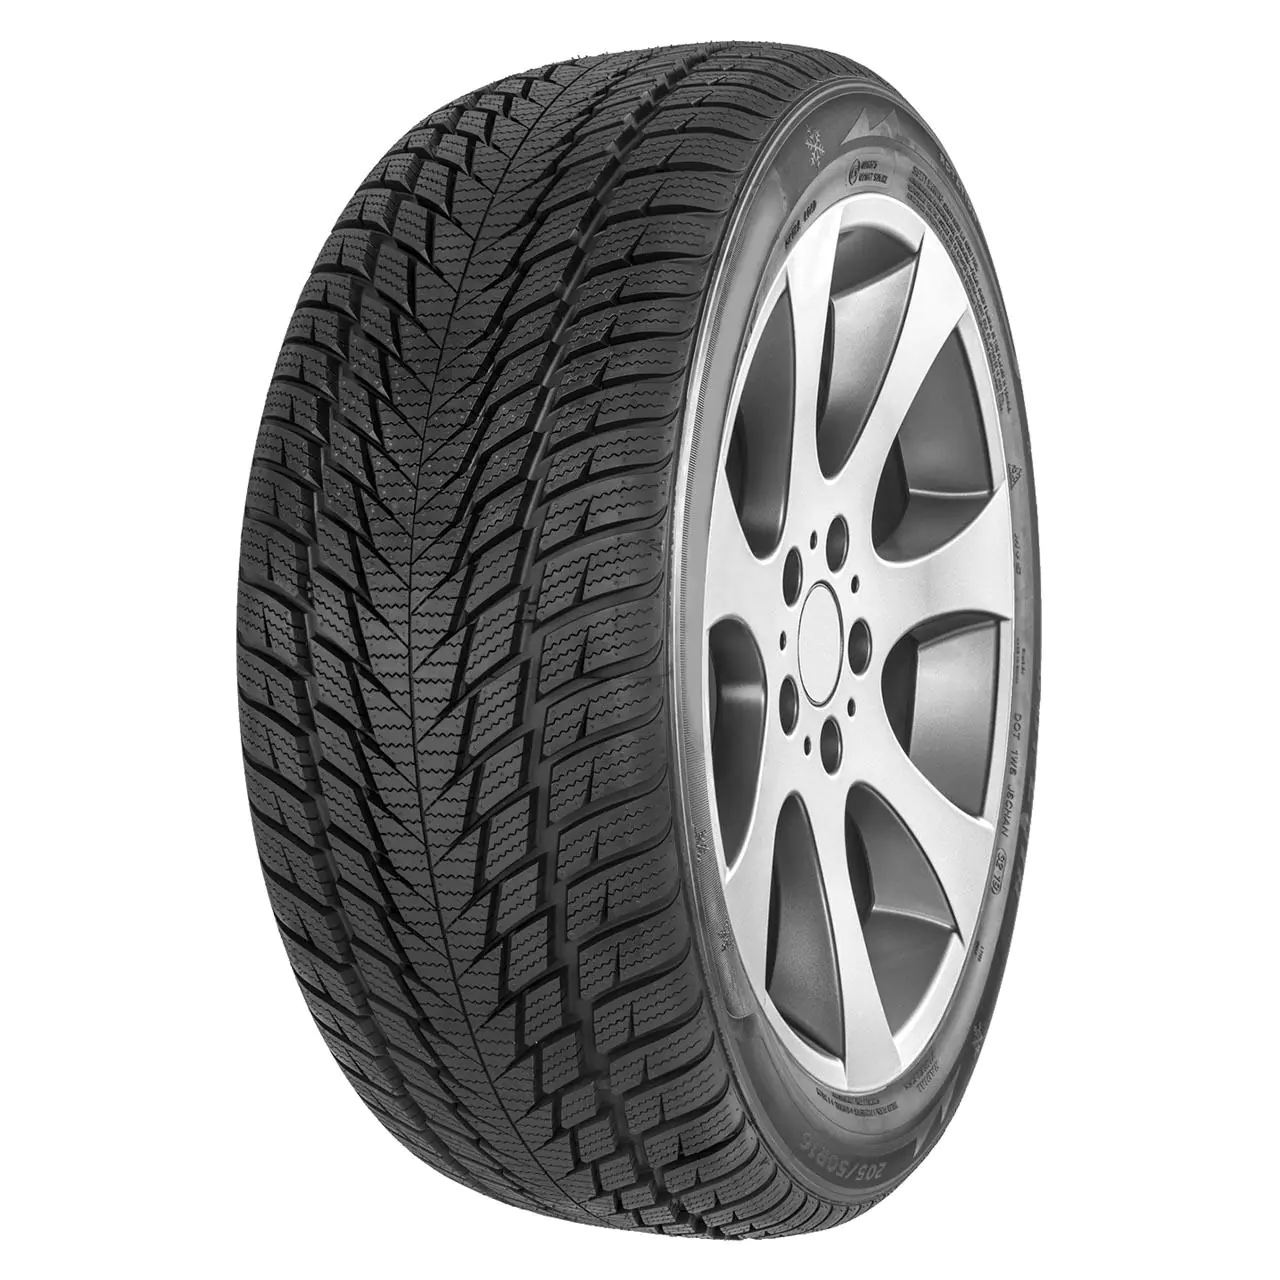 Gomme Autovettura Fortuna 225/45 R18 95V GOWIN UHP2 XL M+S Invernale